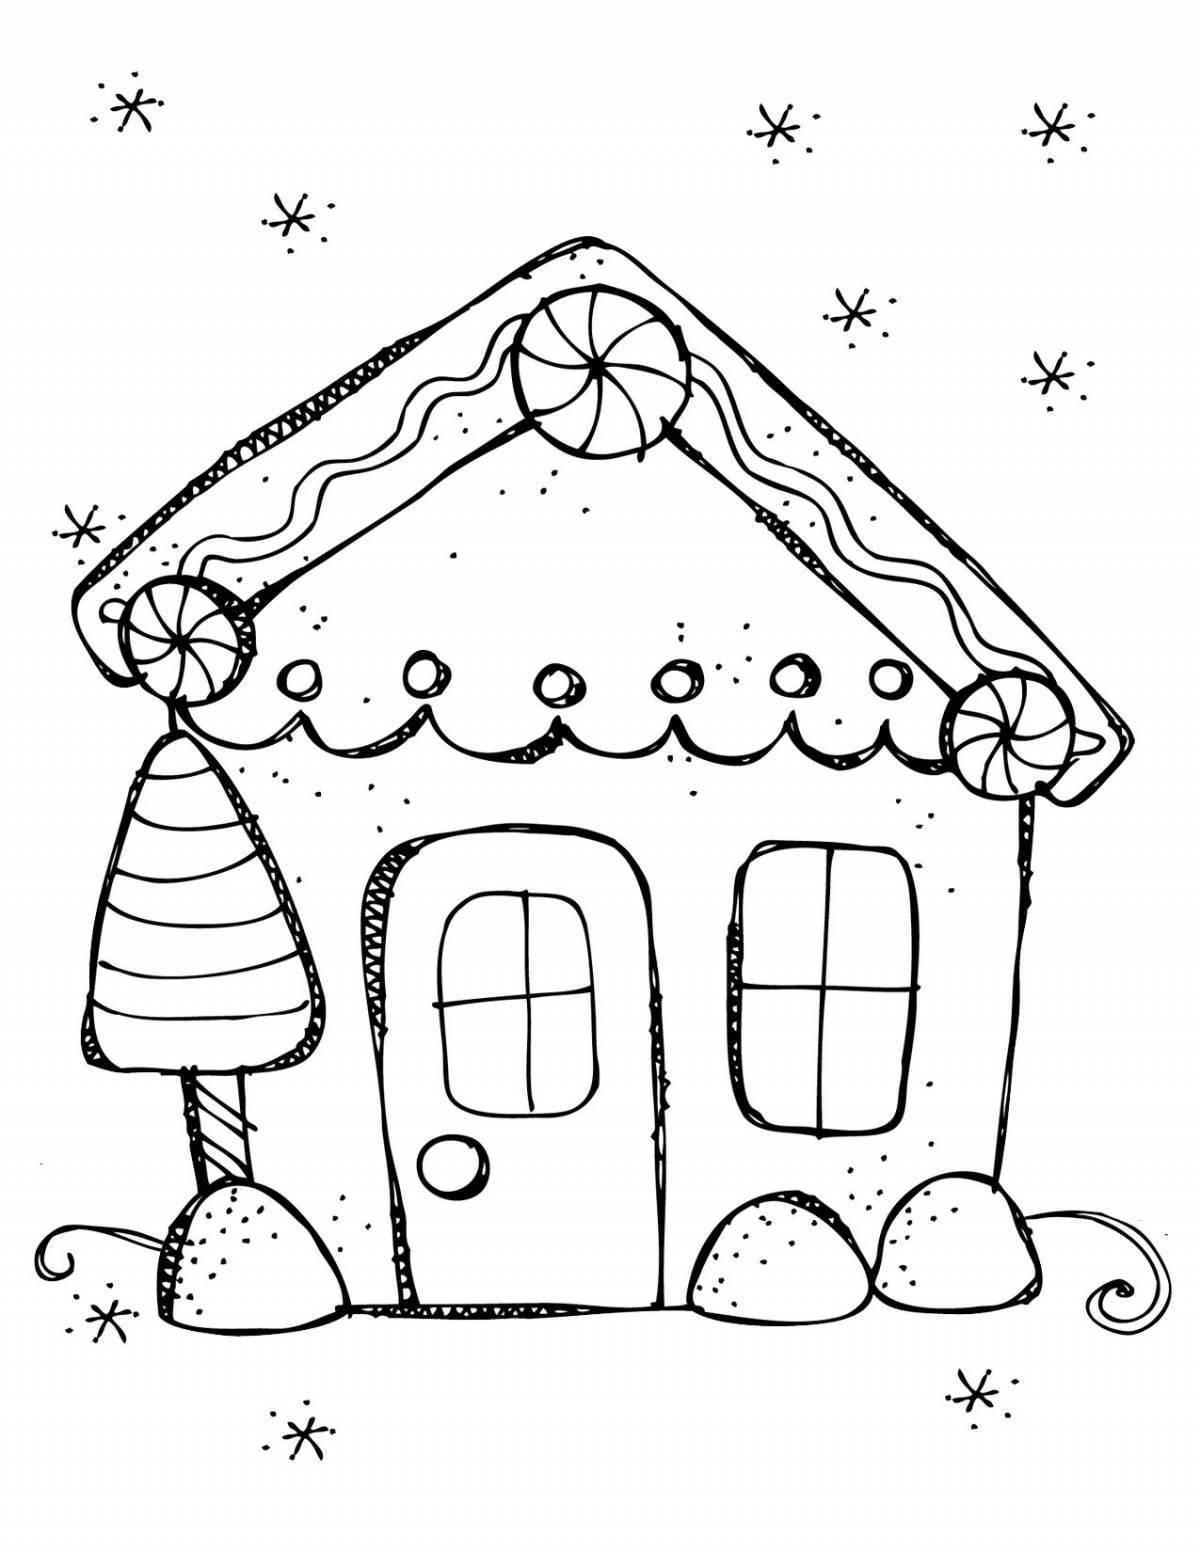 Coloring book exquisite Christmas house